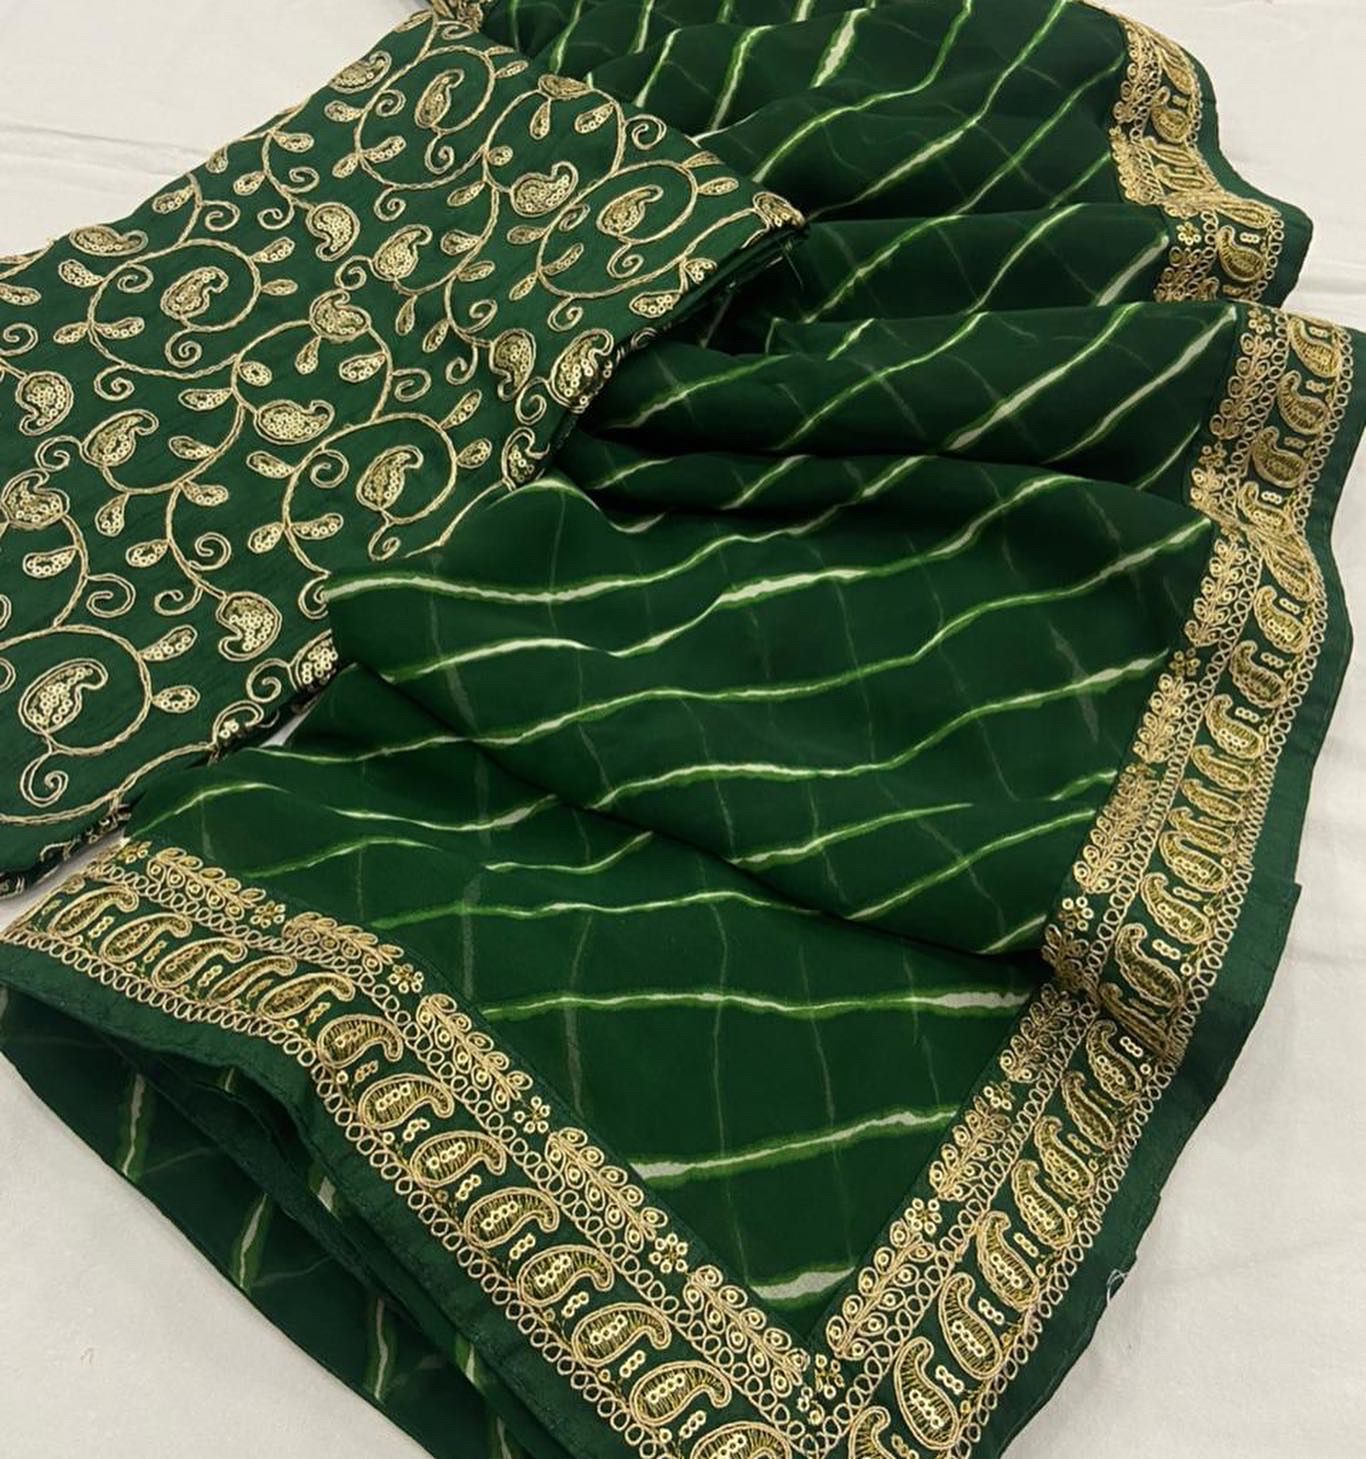 Karwachauth Special Leheriya Saree with Beautiful Embroidered Gotapatti Border and fancy blouse